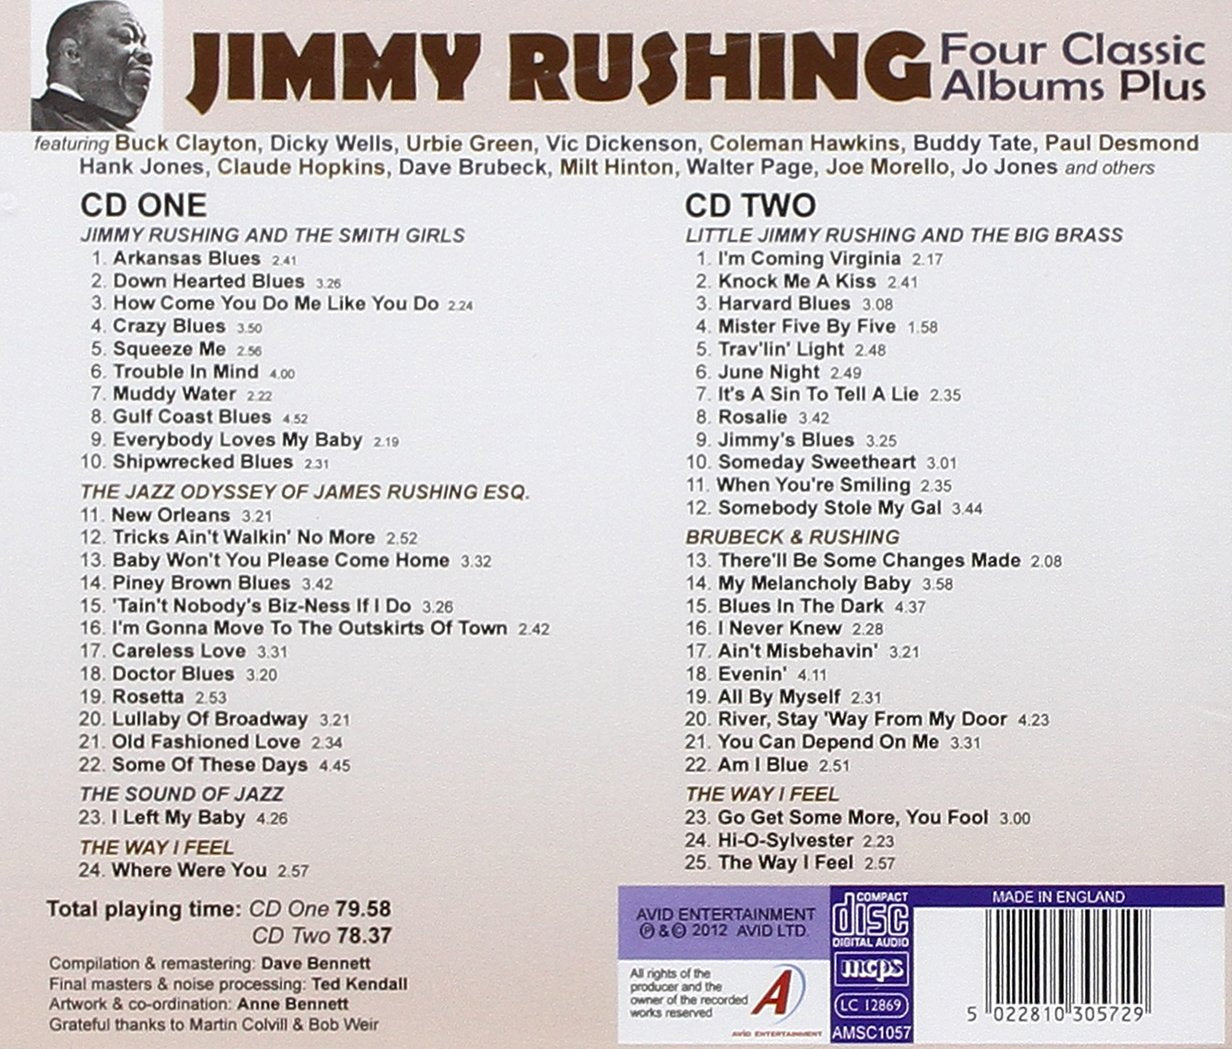 JIMMY RUSHING - Four Classic Albums Plus (Jimmy Rushing And The Smith Girls / The Jazz Odyssey Of James Rushing Esq / Little Jimmy Rushing And The Big Brass / Brubeck & Rushing)